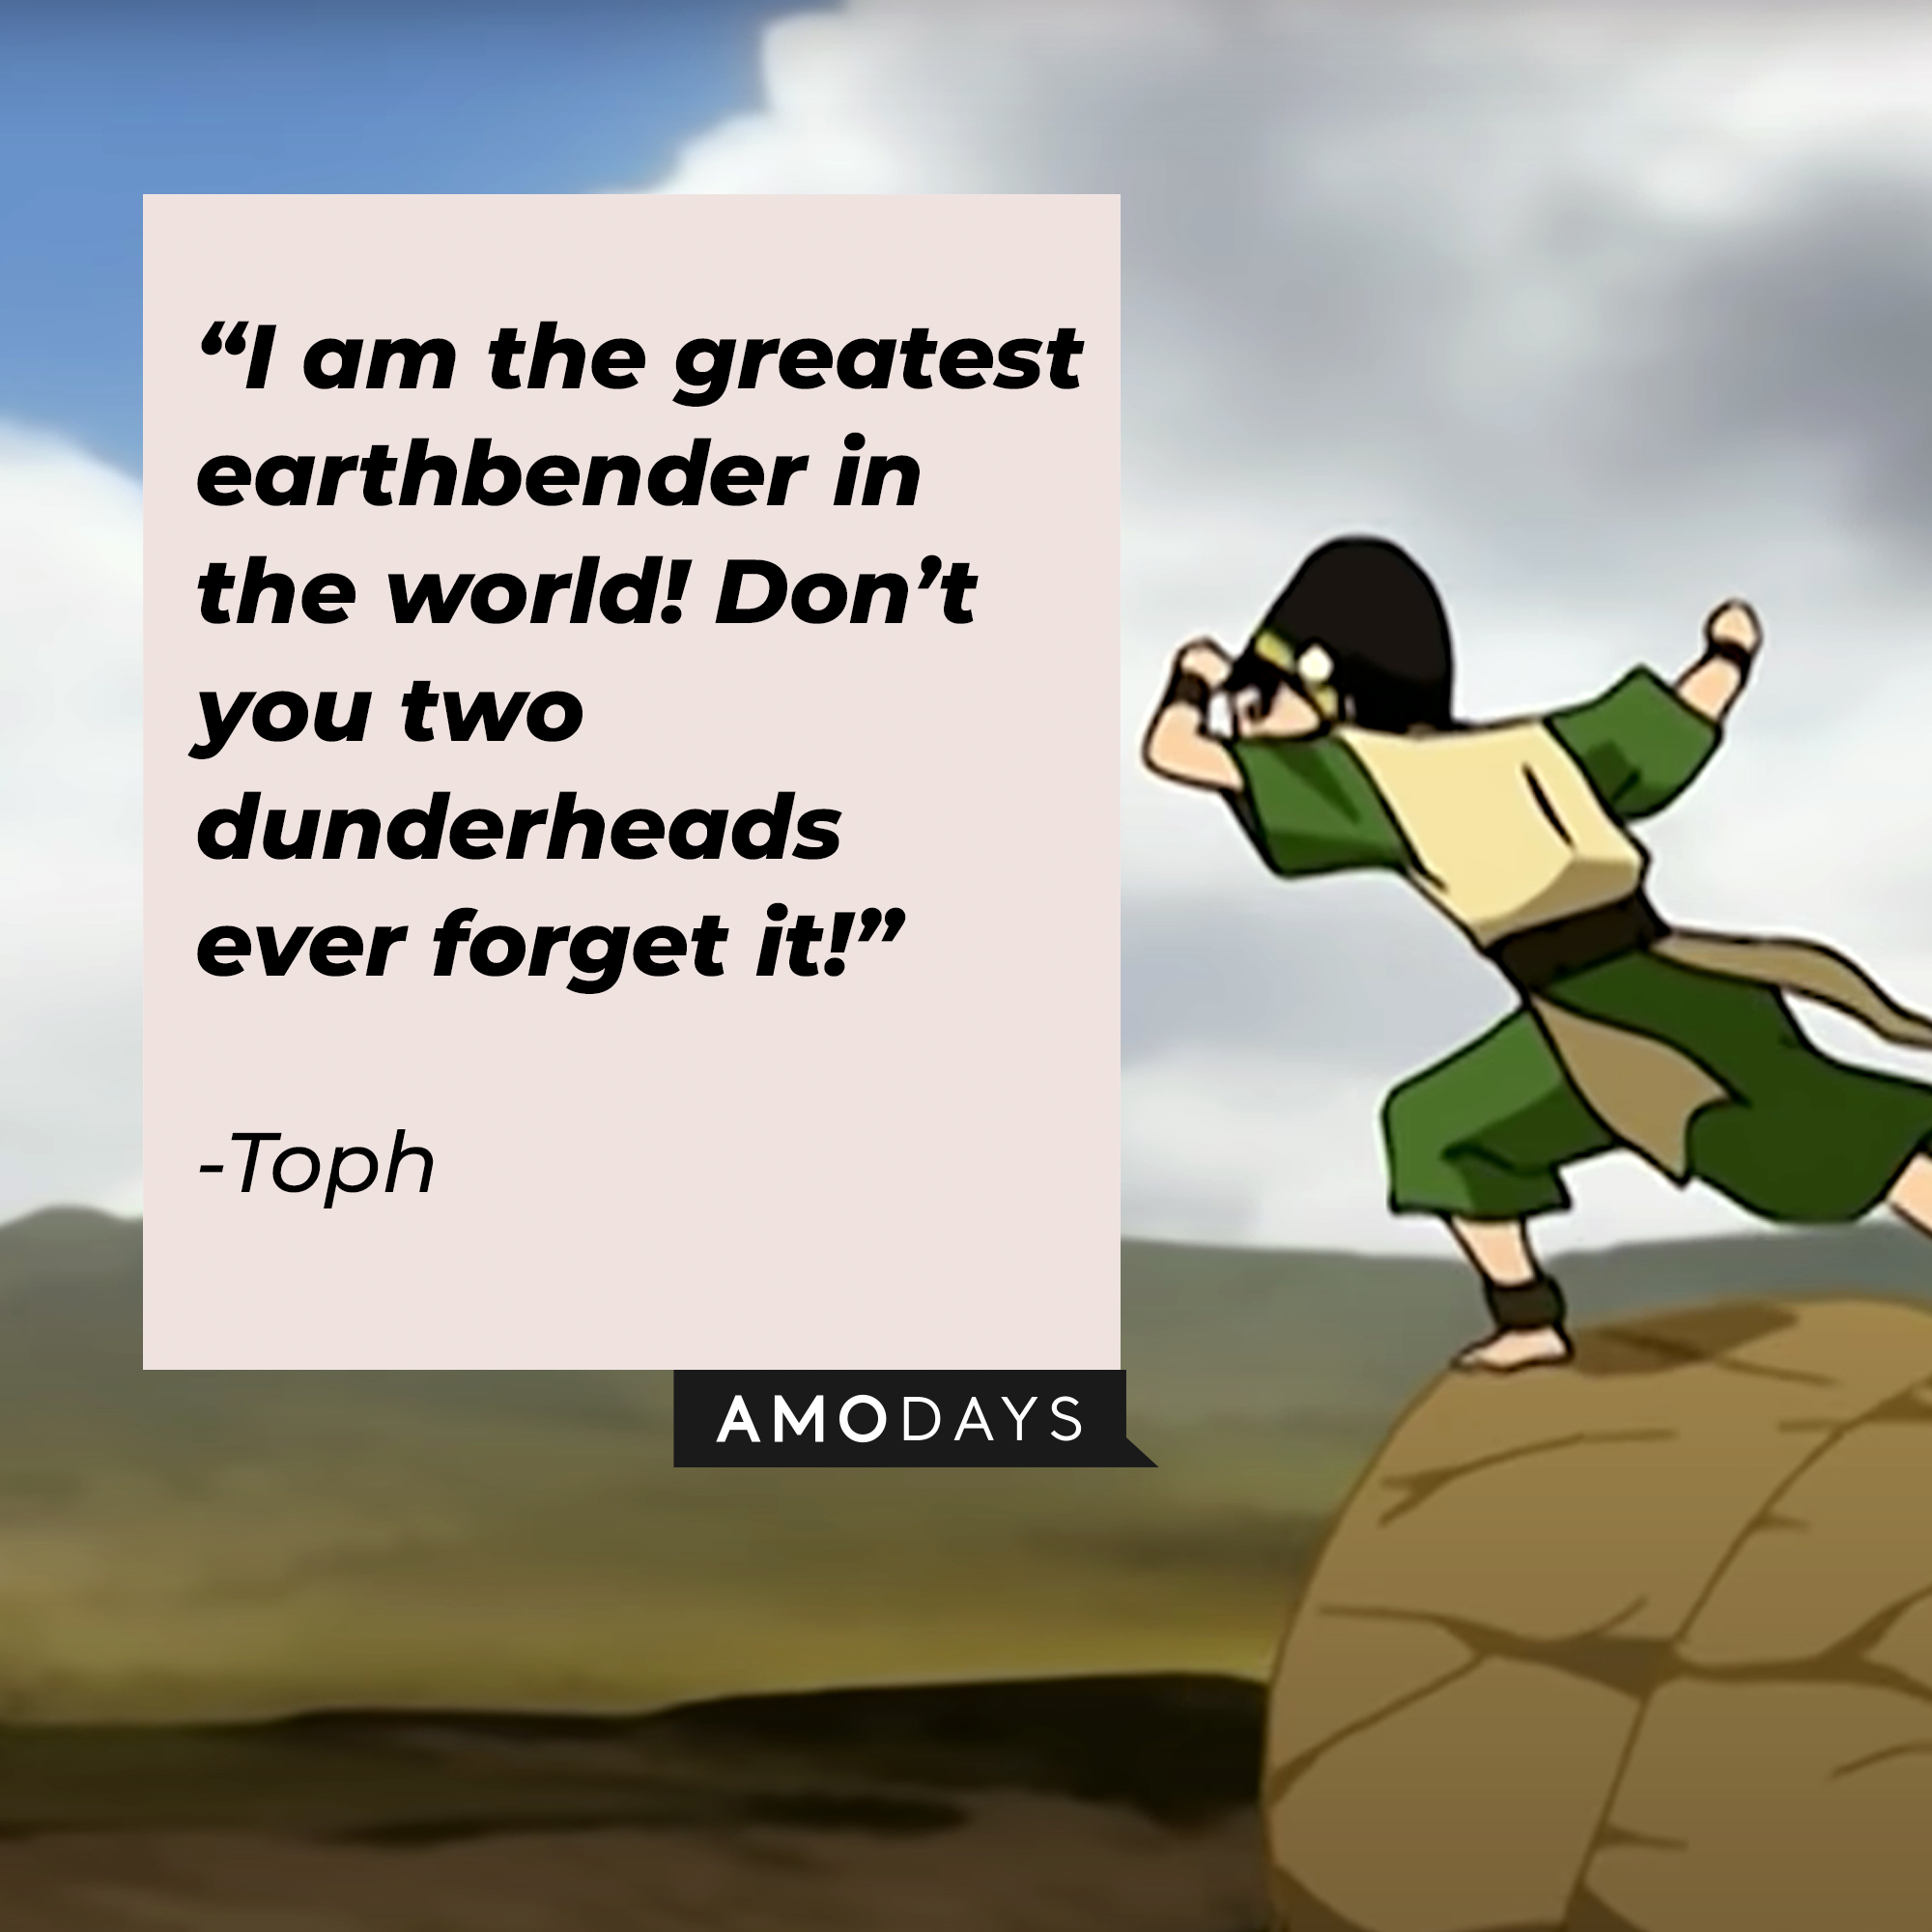 Toph's quote: “I am the greatest earthbender in the world! Don’t you two dunderheads ever forget it!” | Source: youtube.com/TeamAvatar